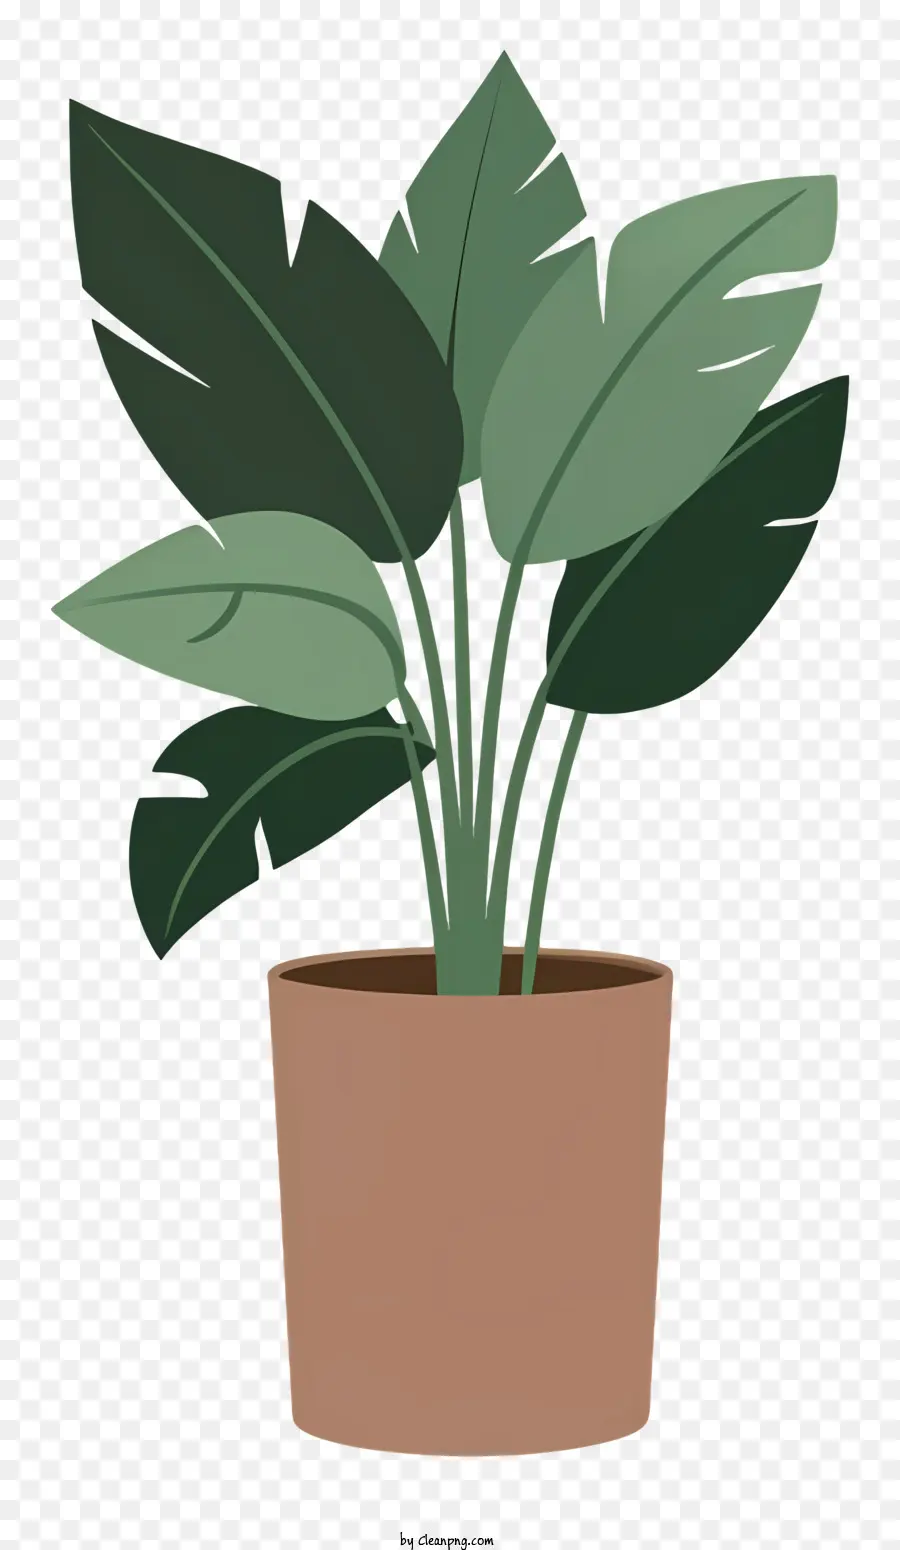 potted plant large leaves small green leaves stem potted soil